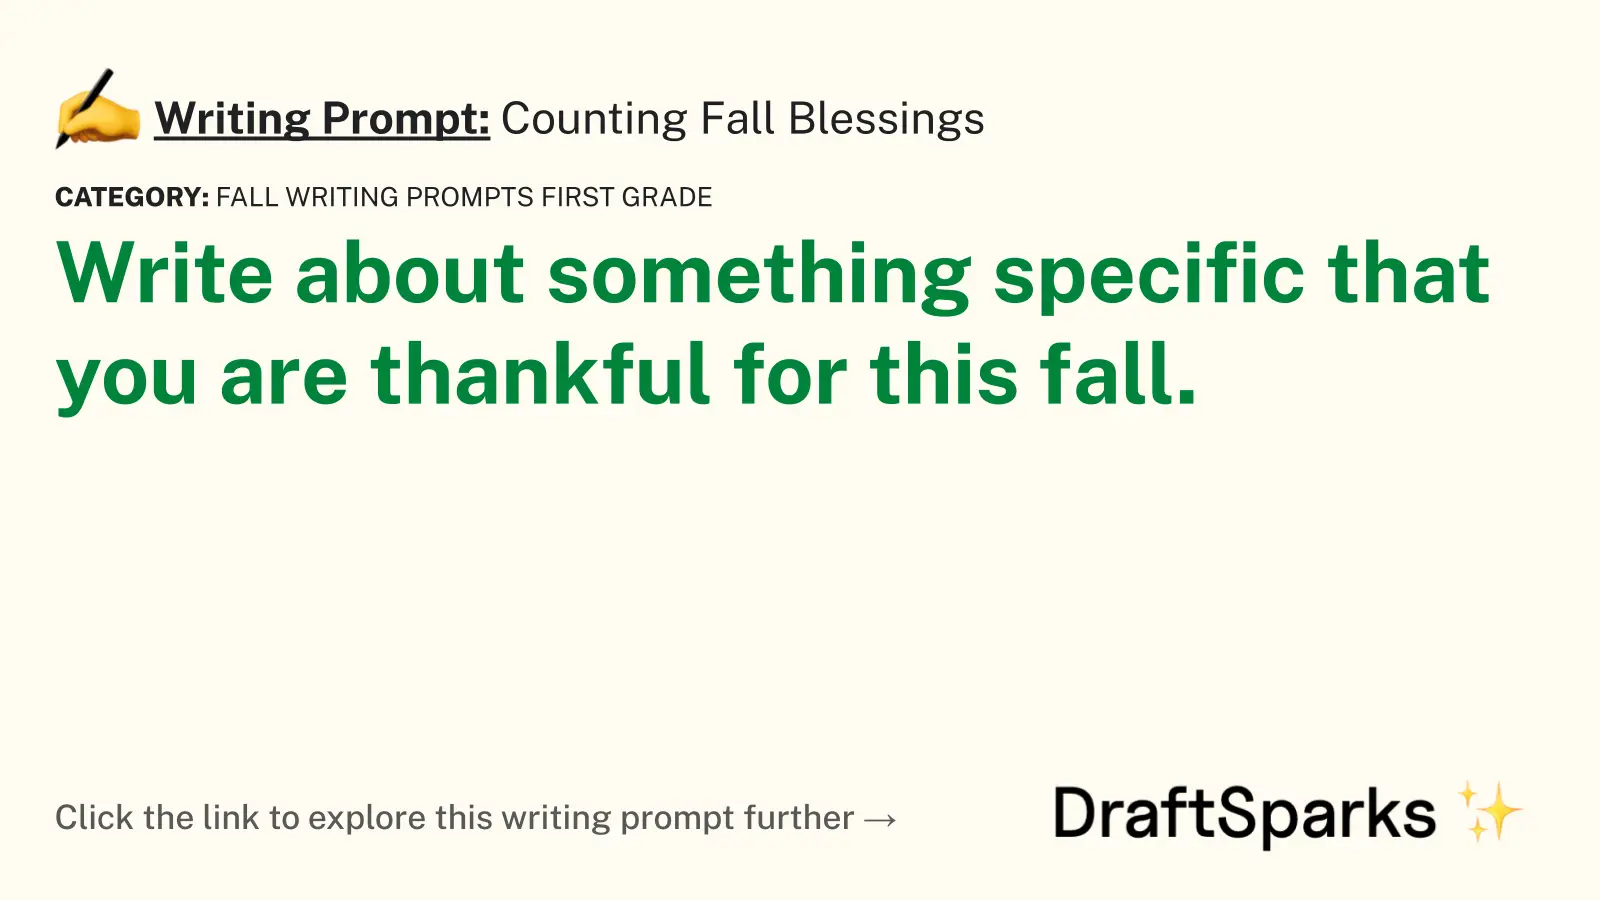 Counting Fall Blessings